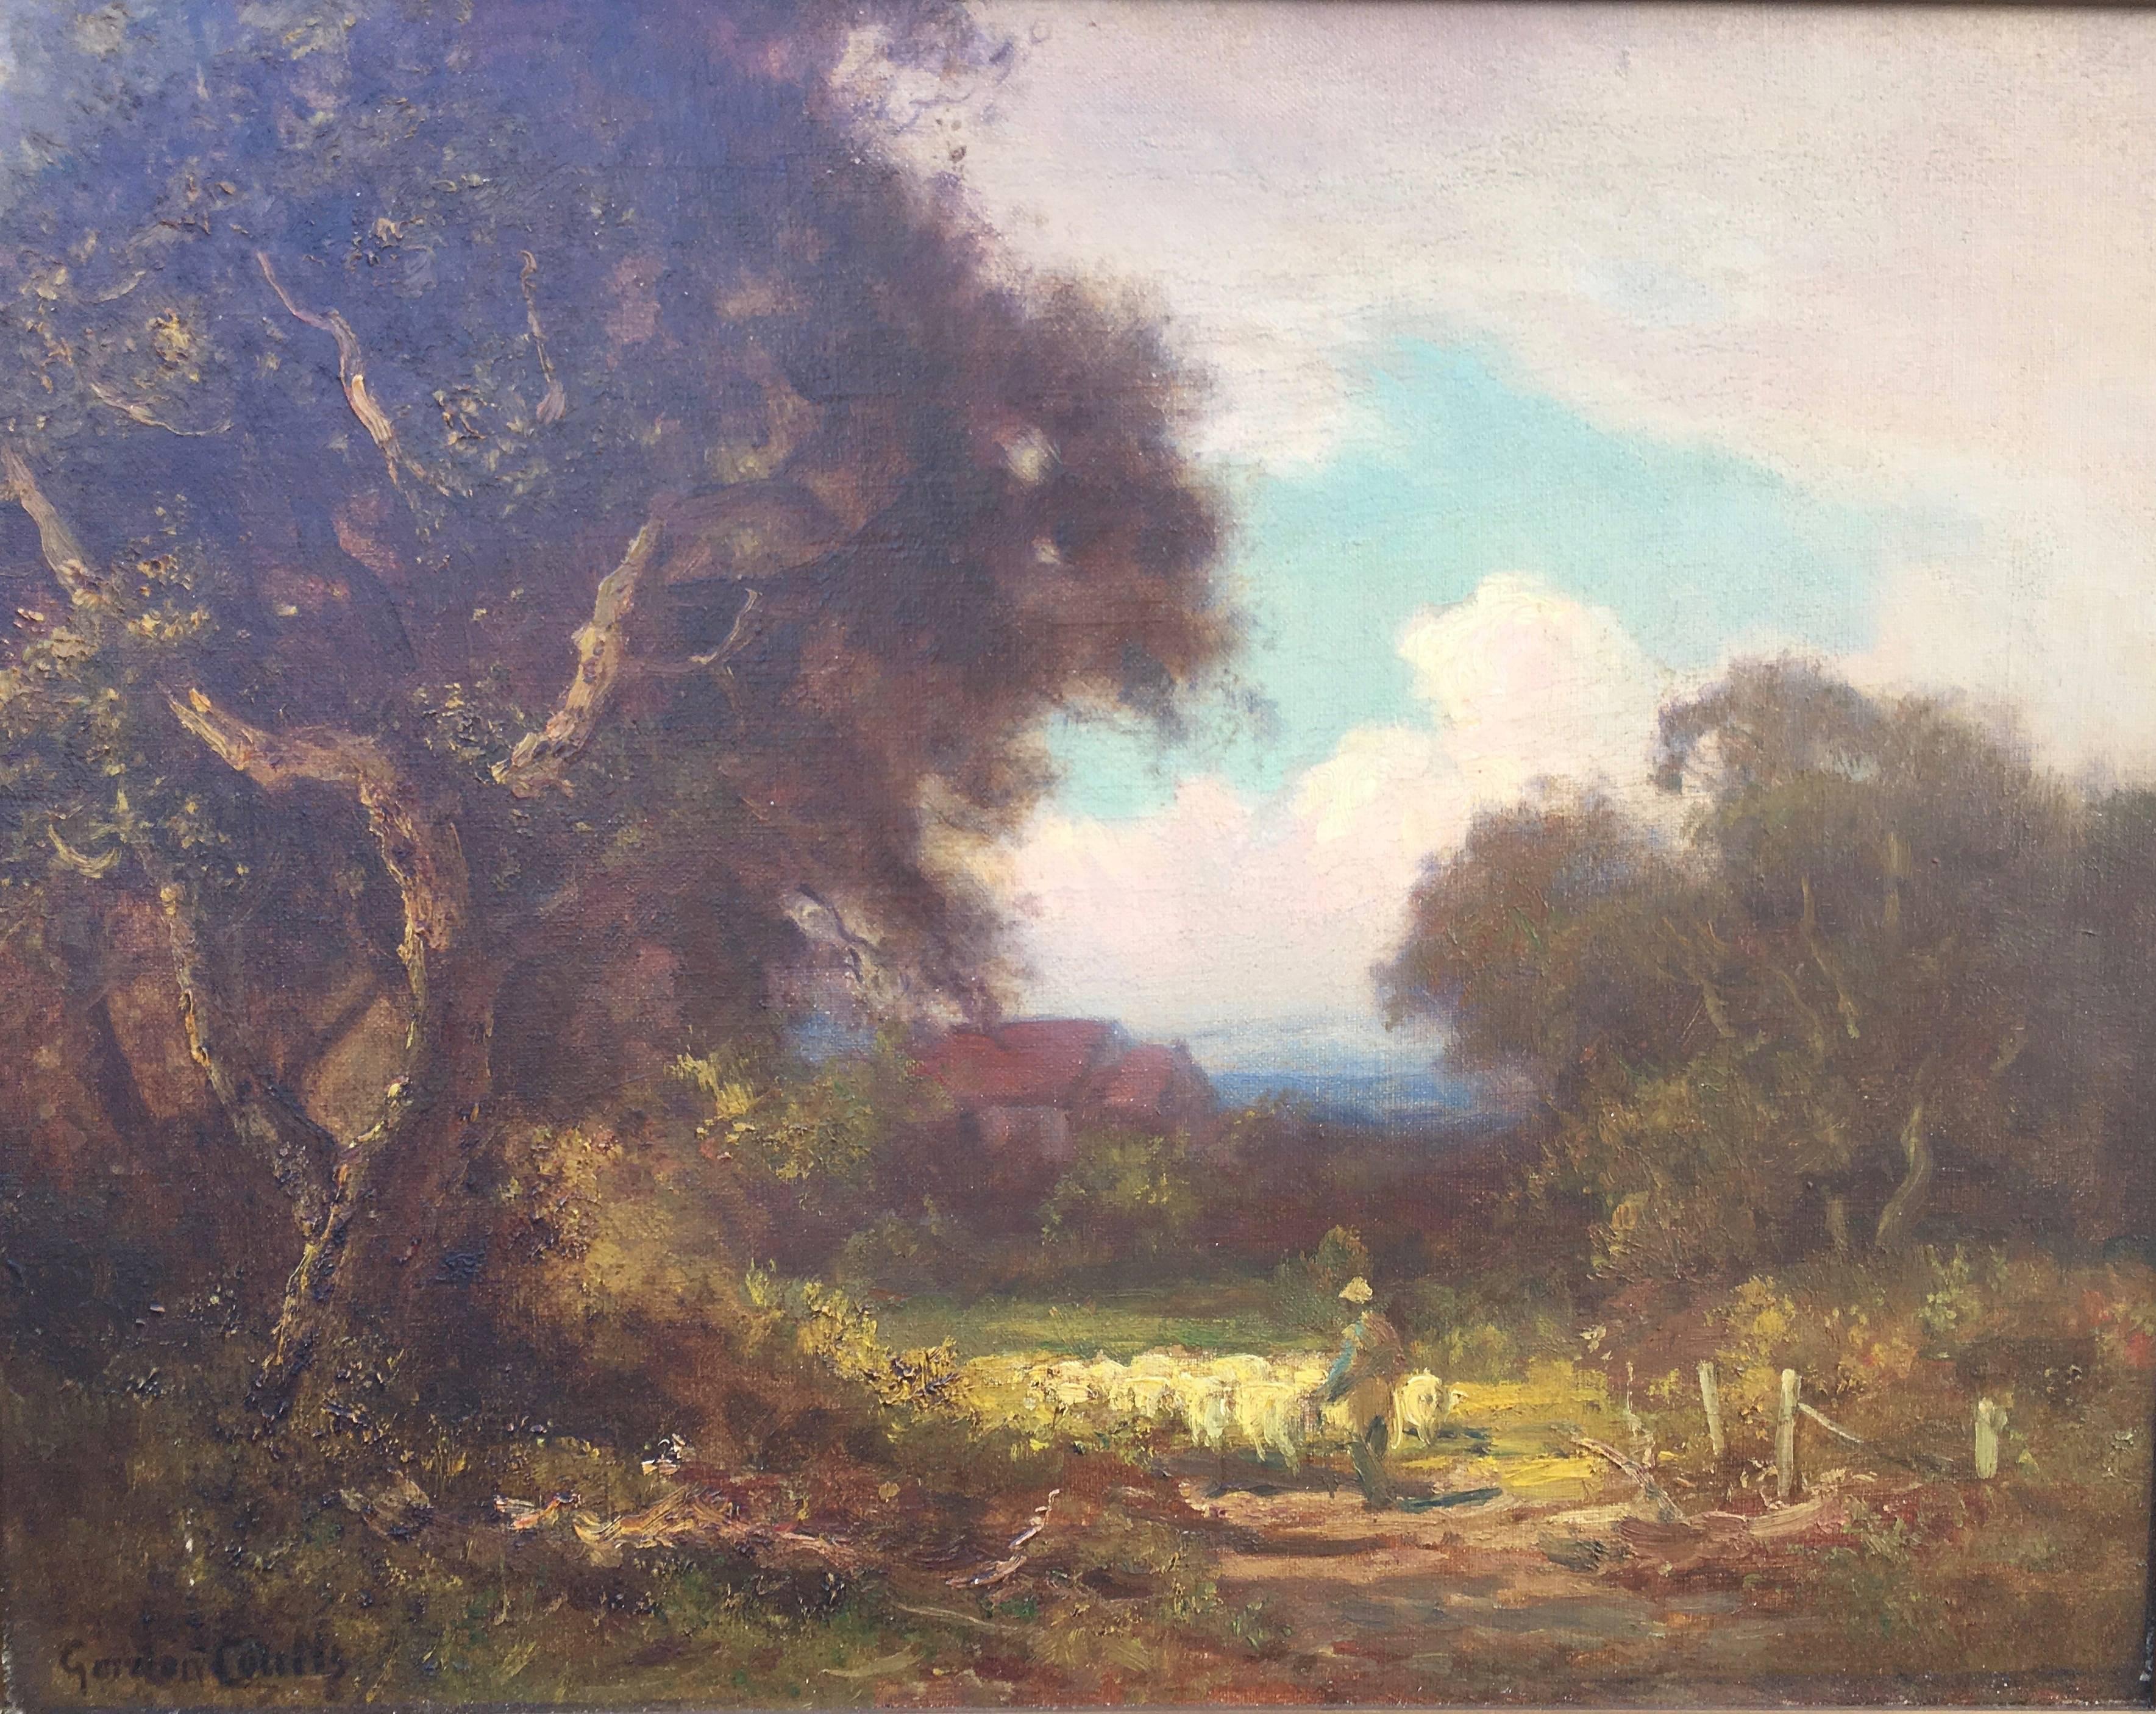 Gordon Coutts Landscape Painting – Shepherd Herding His Sheep Towards Home Through the Trees 